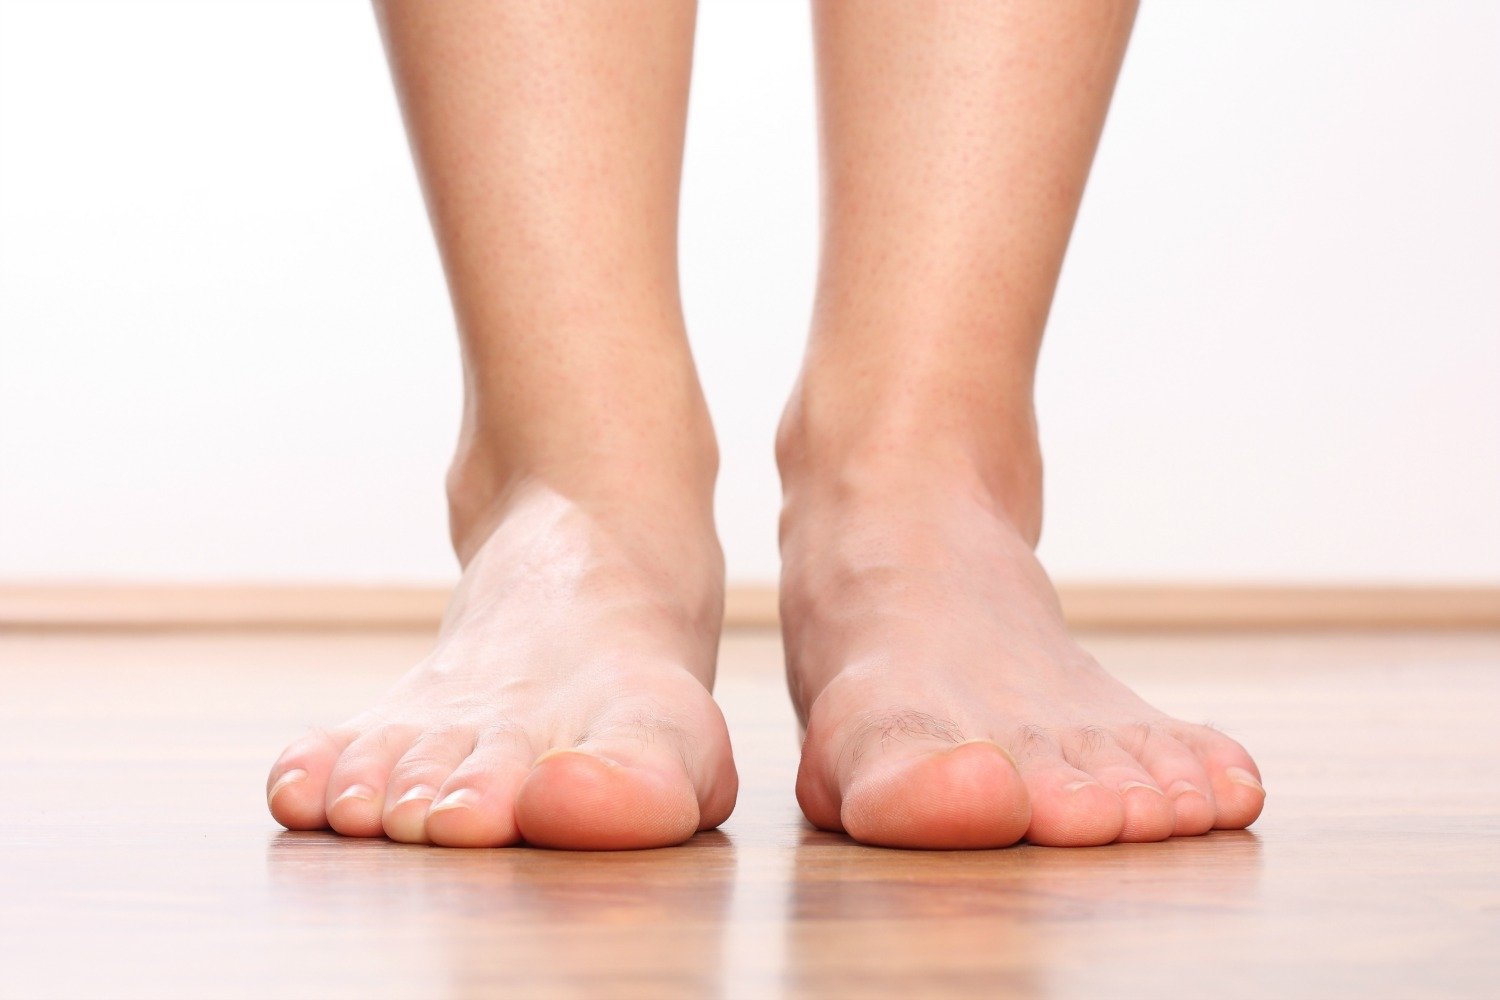 Don’t Let Diabetes Knock You Off Your Feet